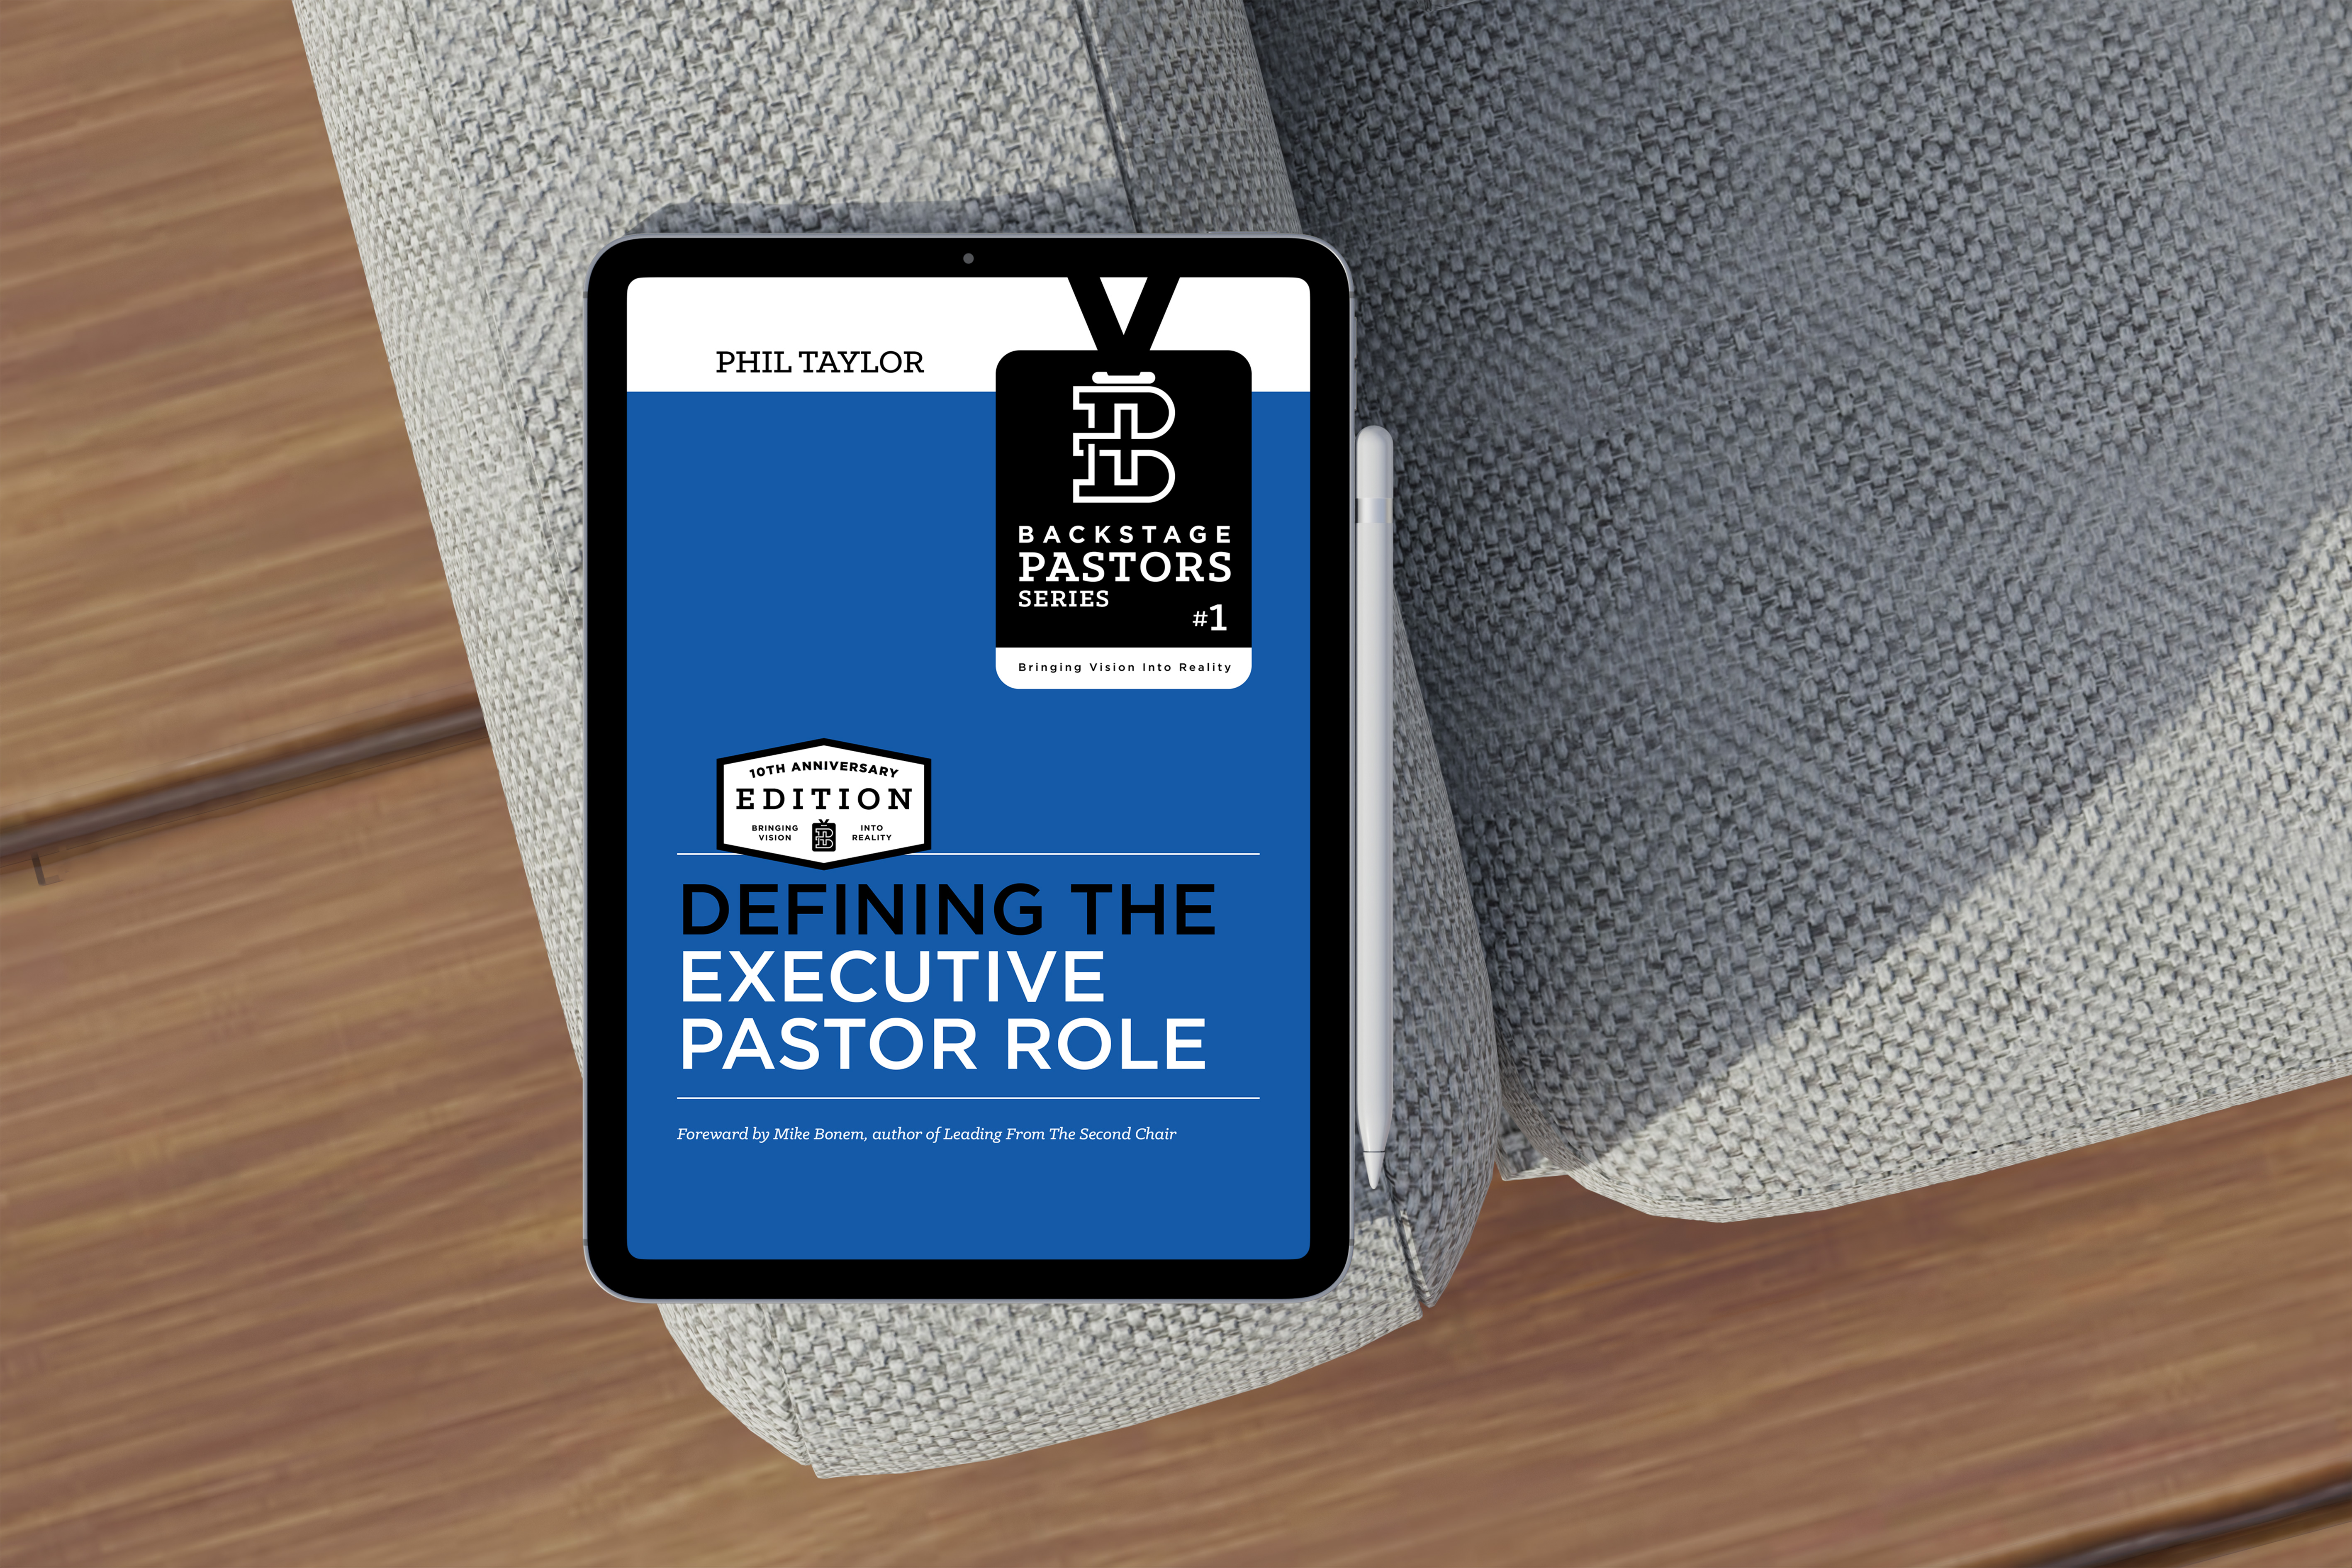 DEFINING THE EXECUTIVE PASTOR ROLE